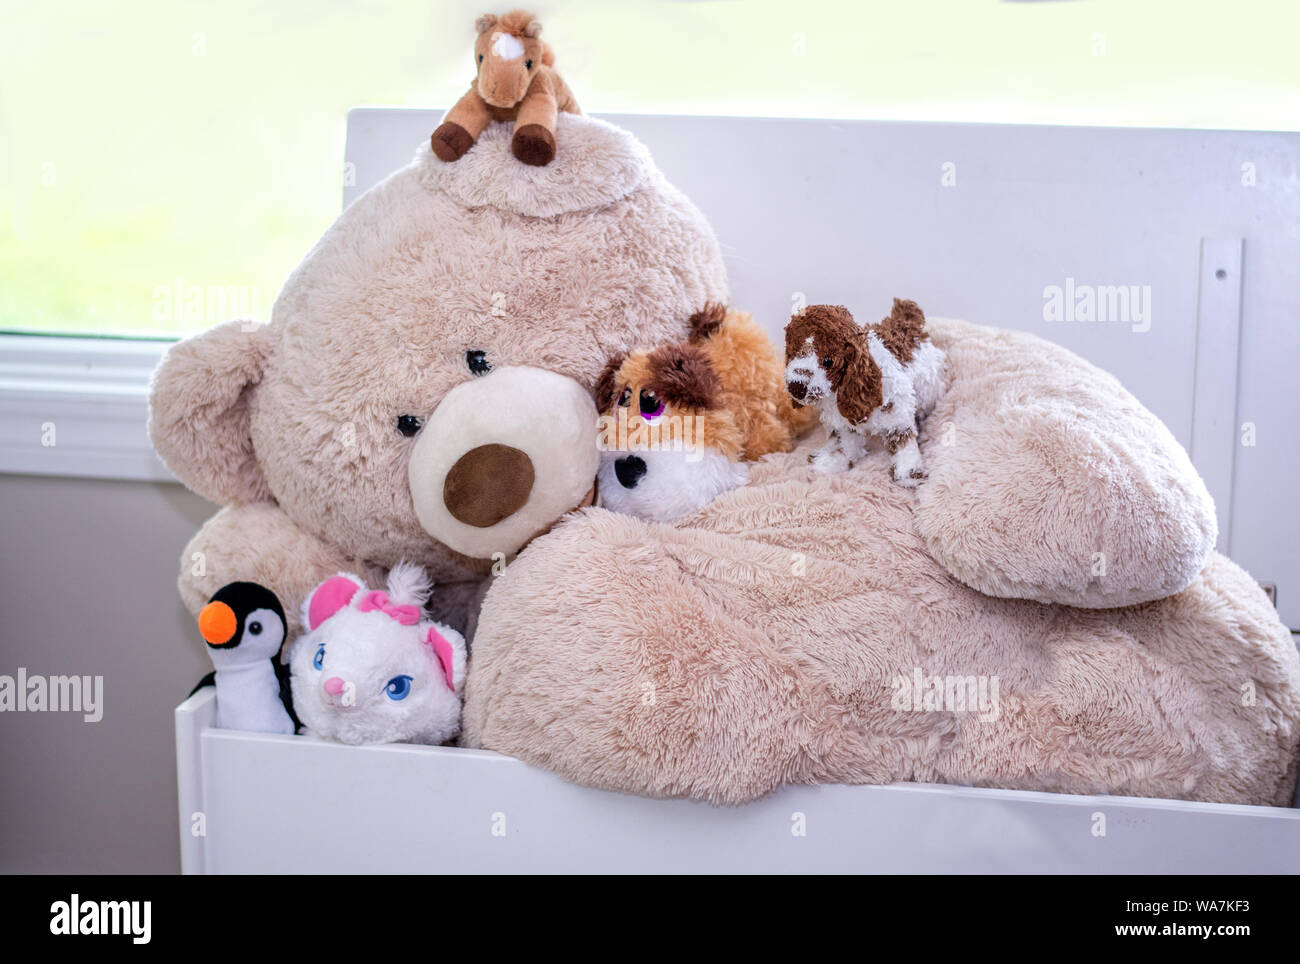 A large stuffed bear is covered with many smaller stuffed toys, a toy friendship in the playroom Stock Photo